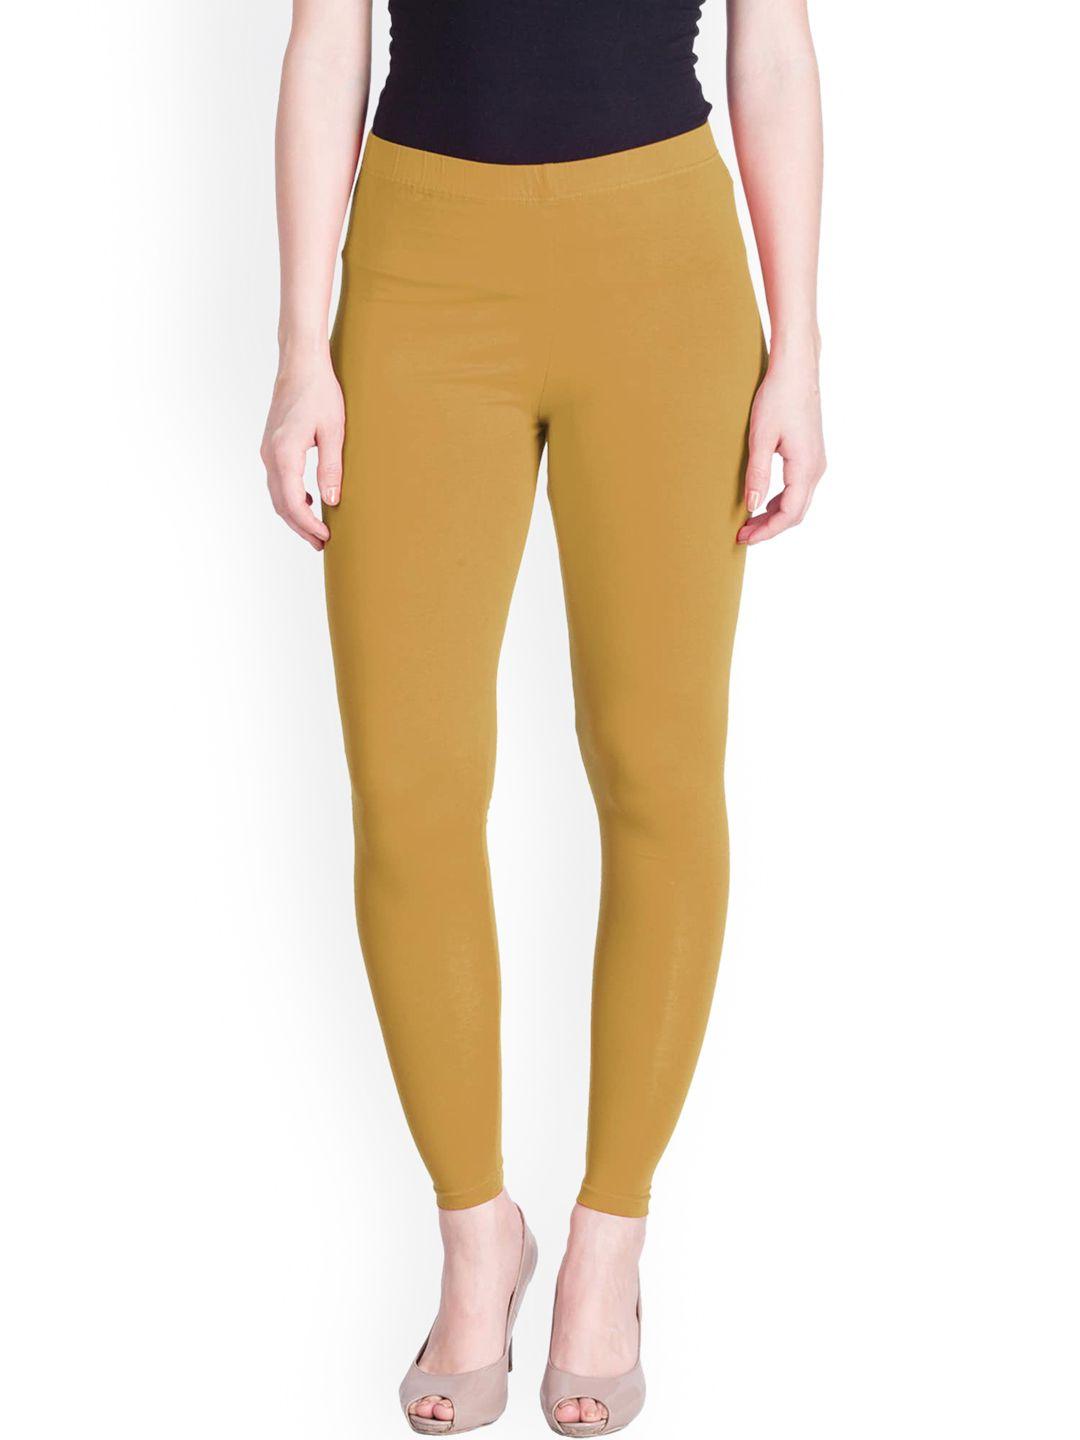 lyra-women-sand-bronze-colored-solid-ankle-length-leggings